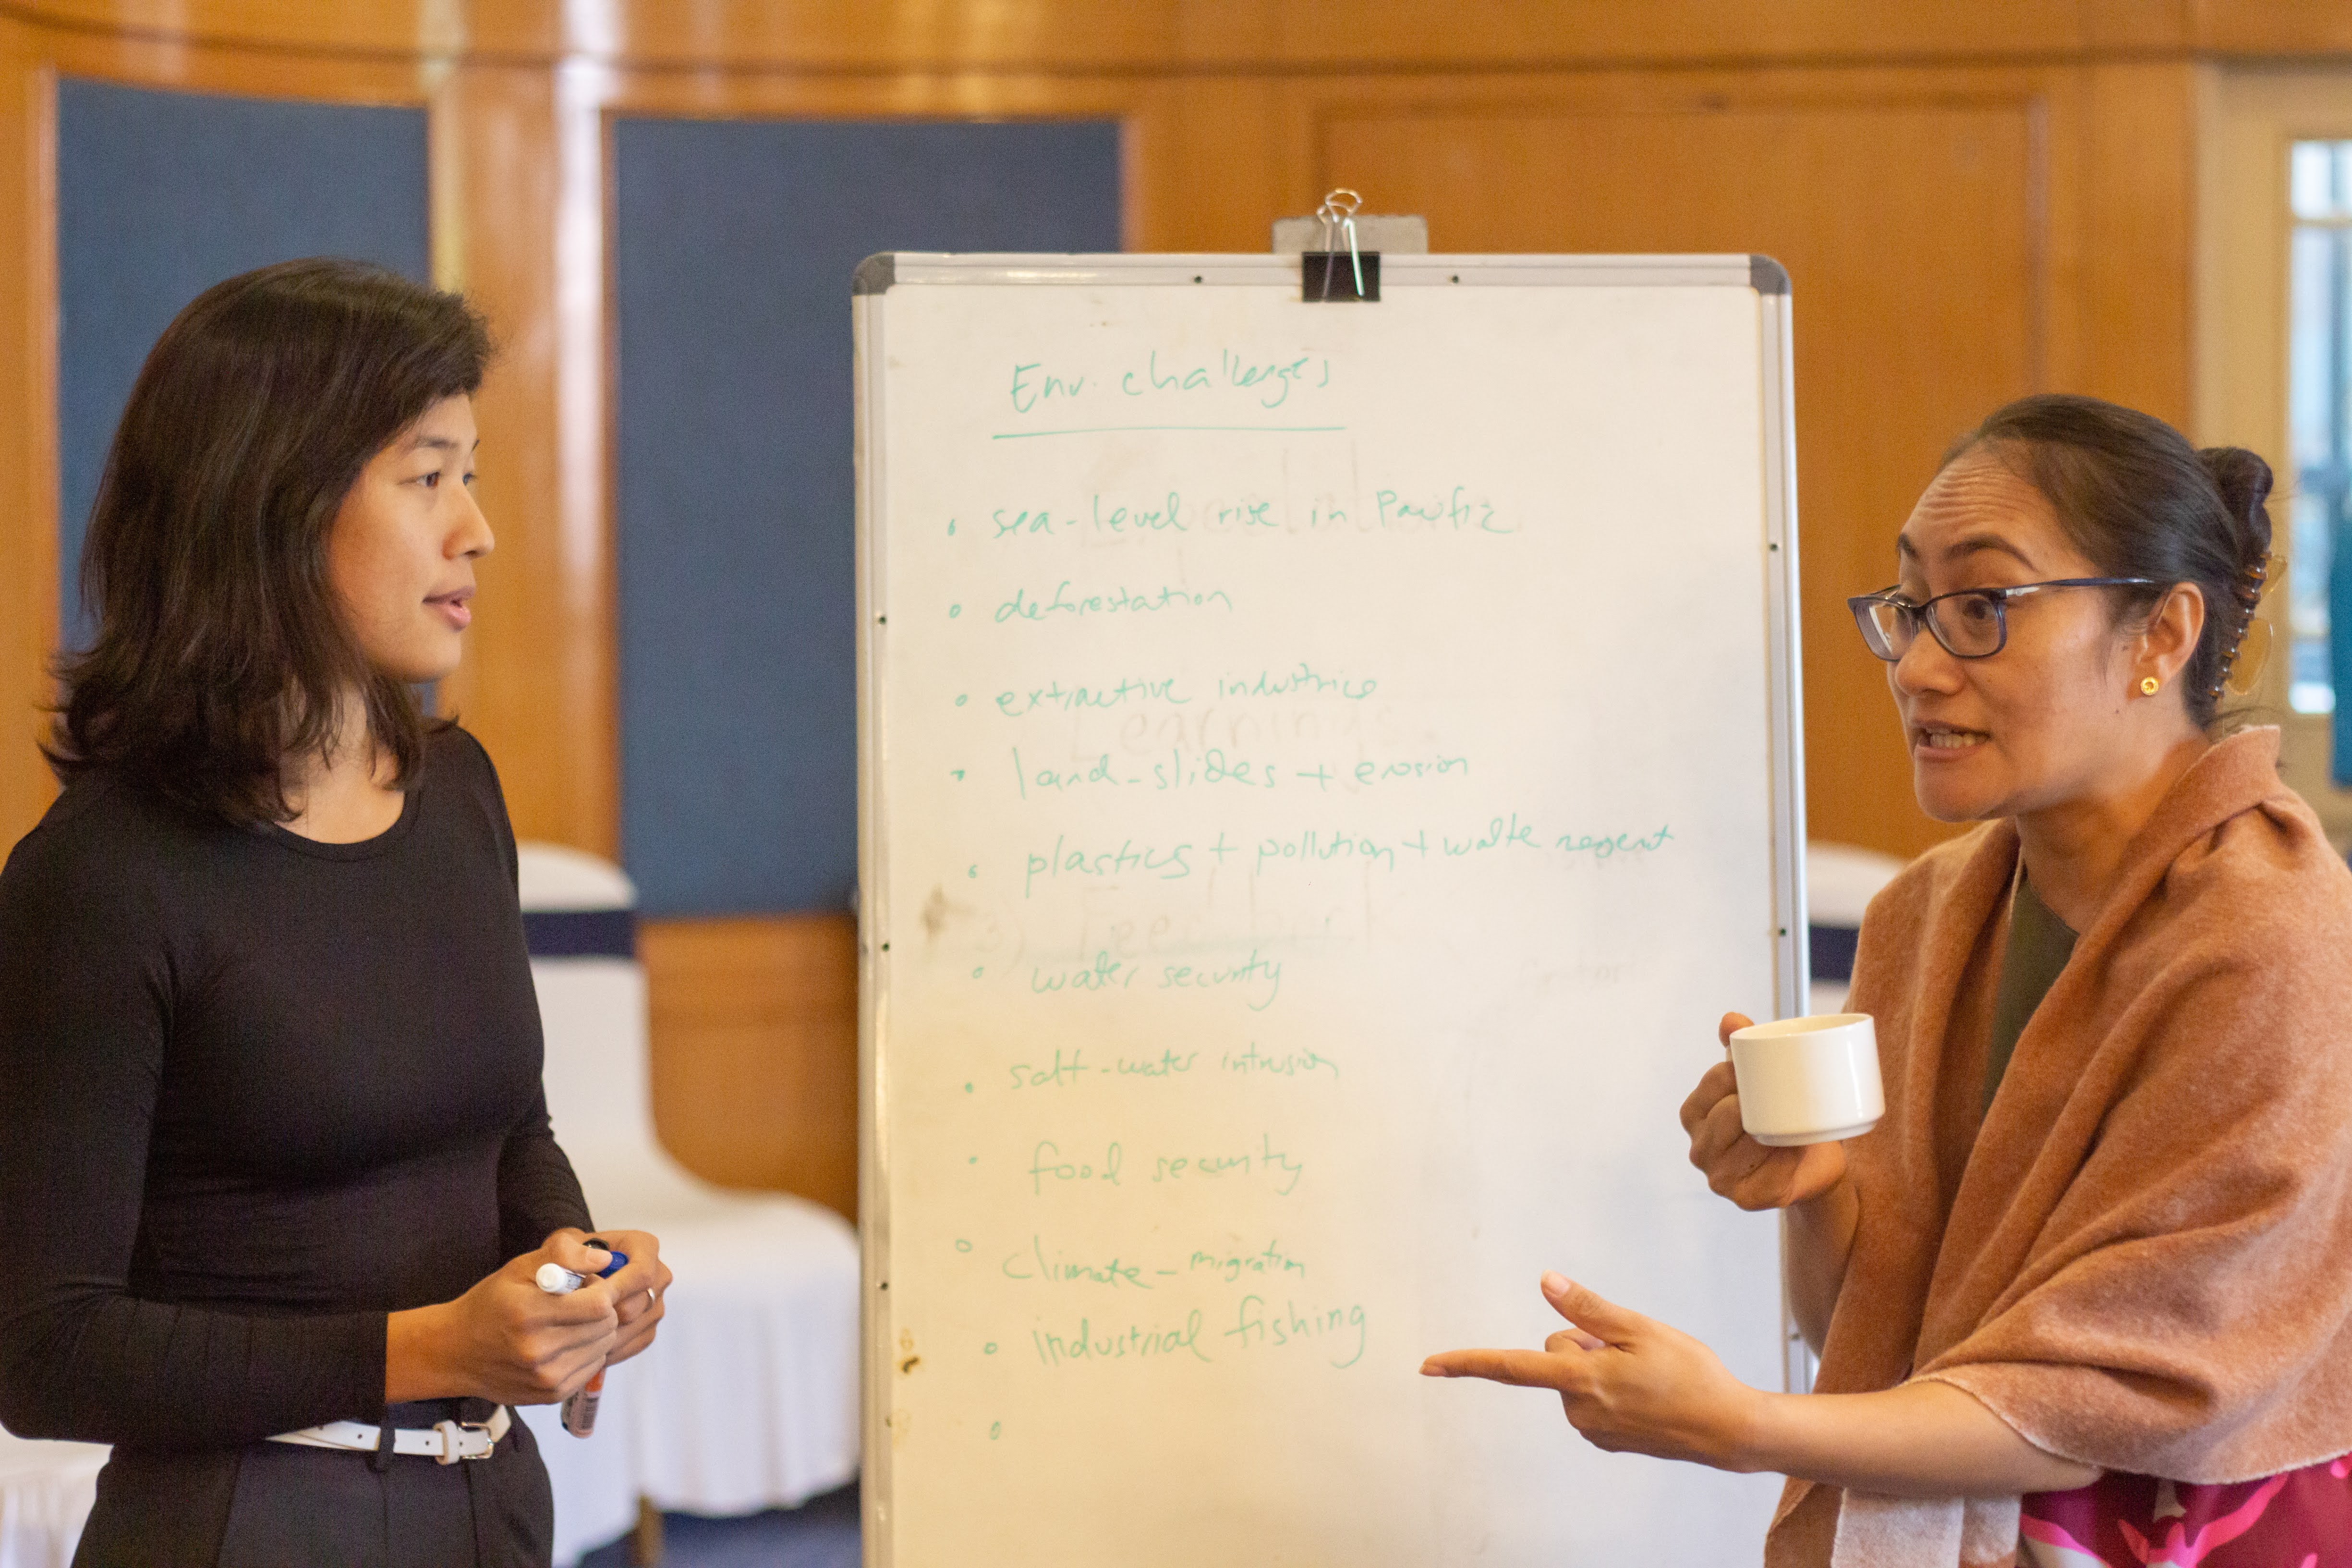 Participant from Thibi, Myanmar, Thwe Thwe Soe (Nida) (left) and EJN’s project coordinator for Asia, Donna Hoerder (right) from Fiji, discussing key environmental challenges of Asia-Pacific countries / Credit: Michael Salzwedel. 